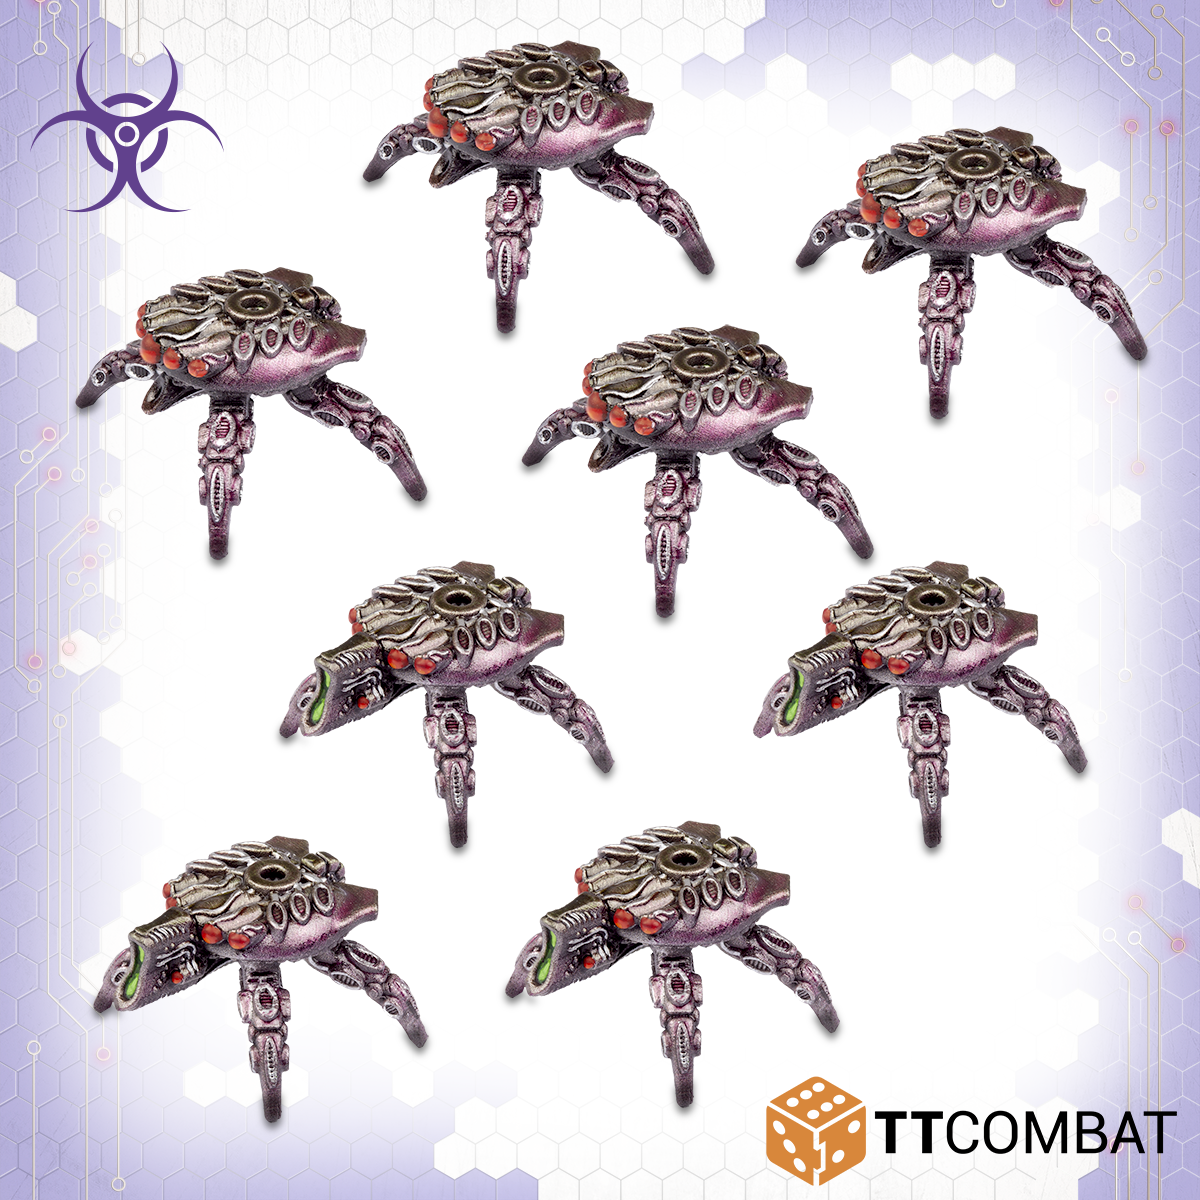 Prowler Spider Drones | Gopher Games